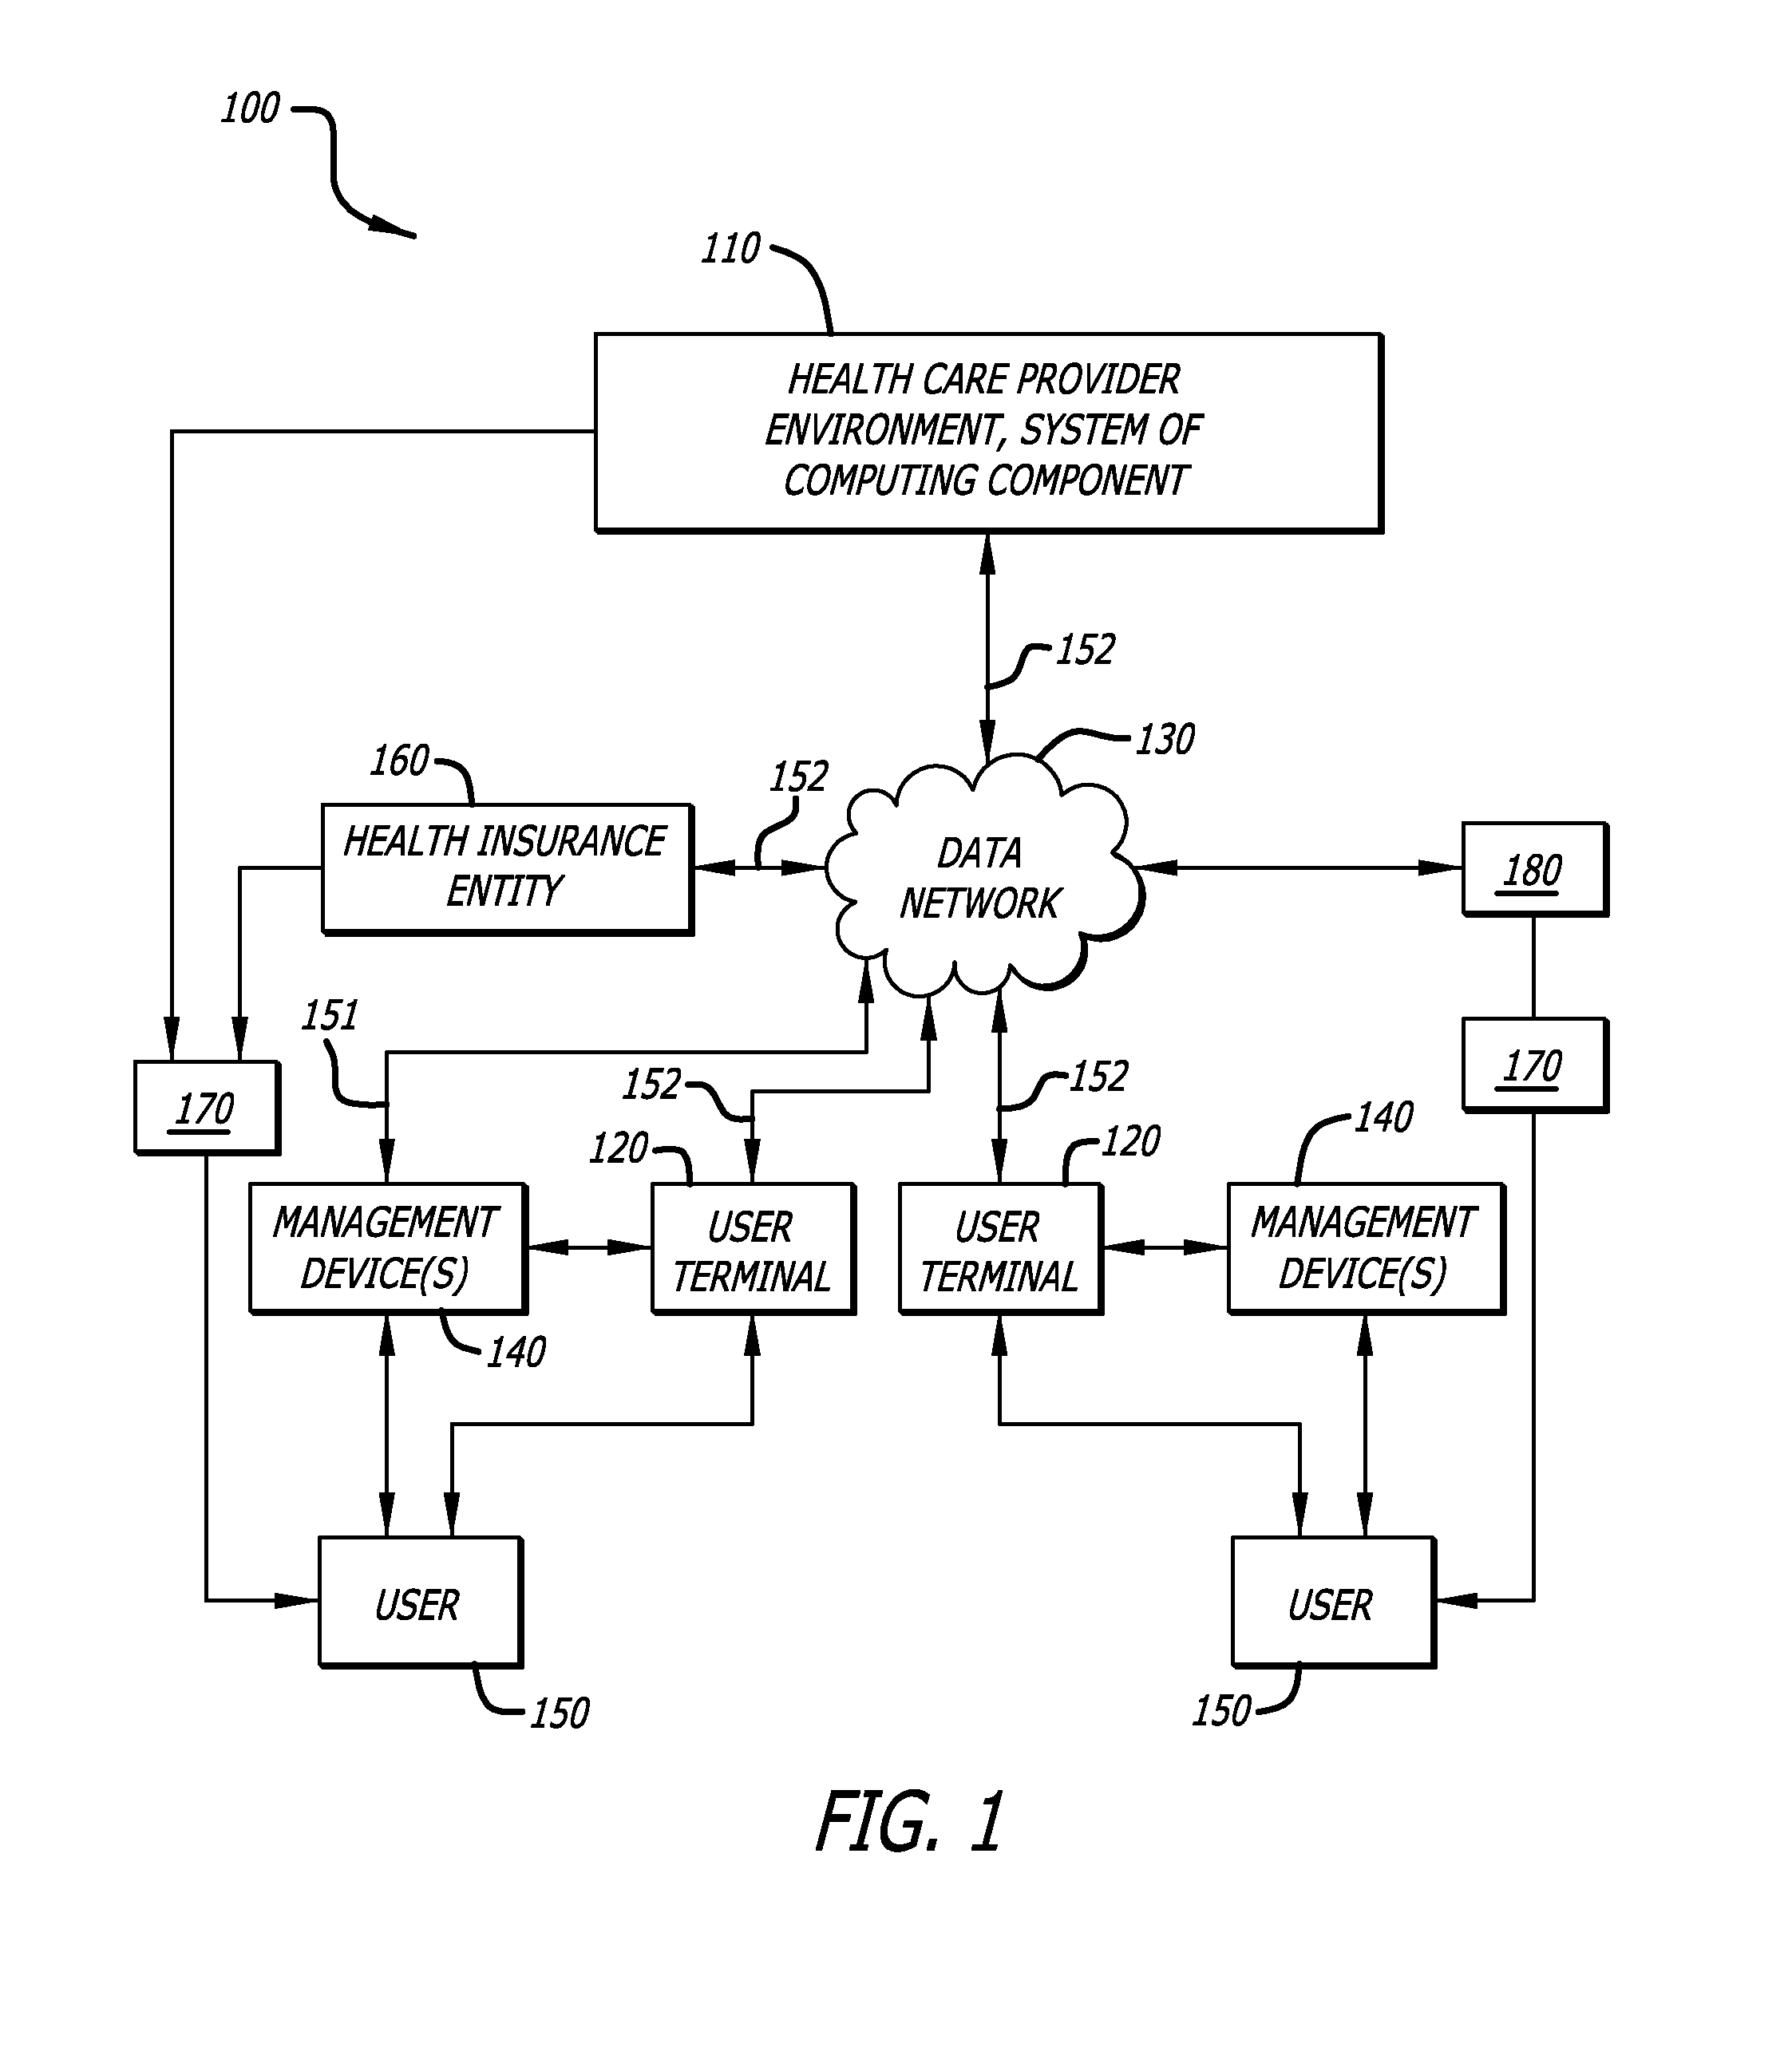 System and method for analysis of medical data to encourage health care management